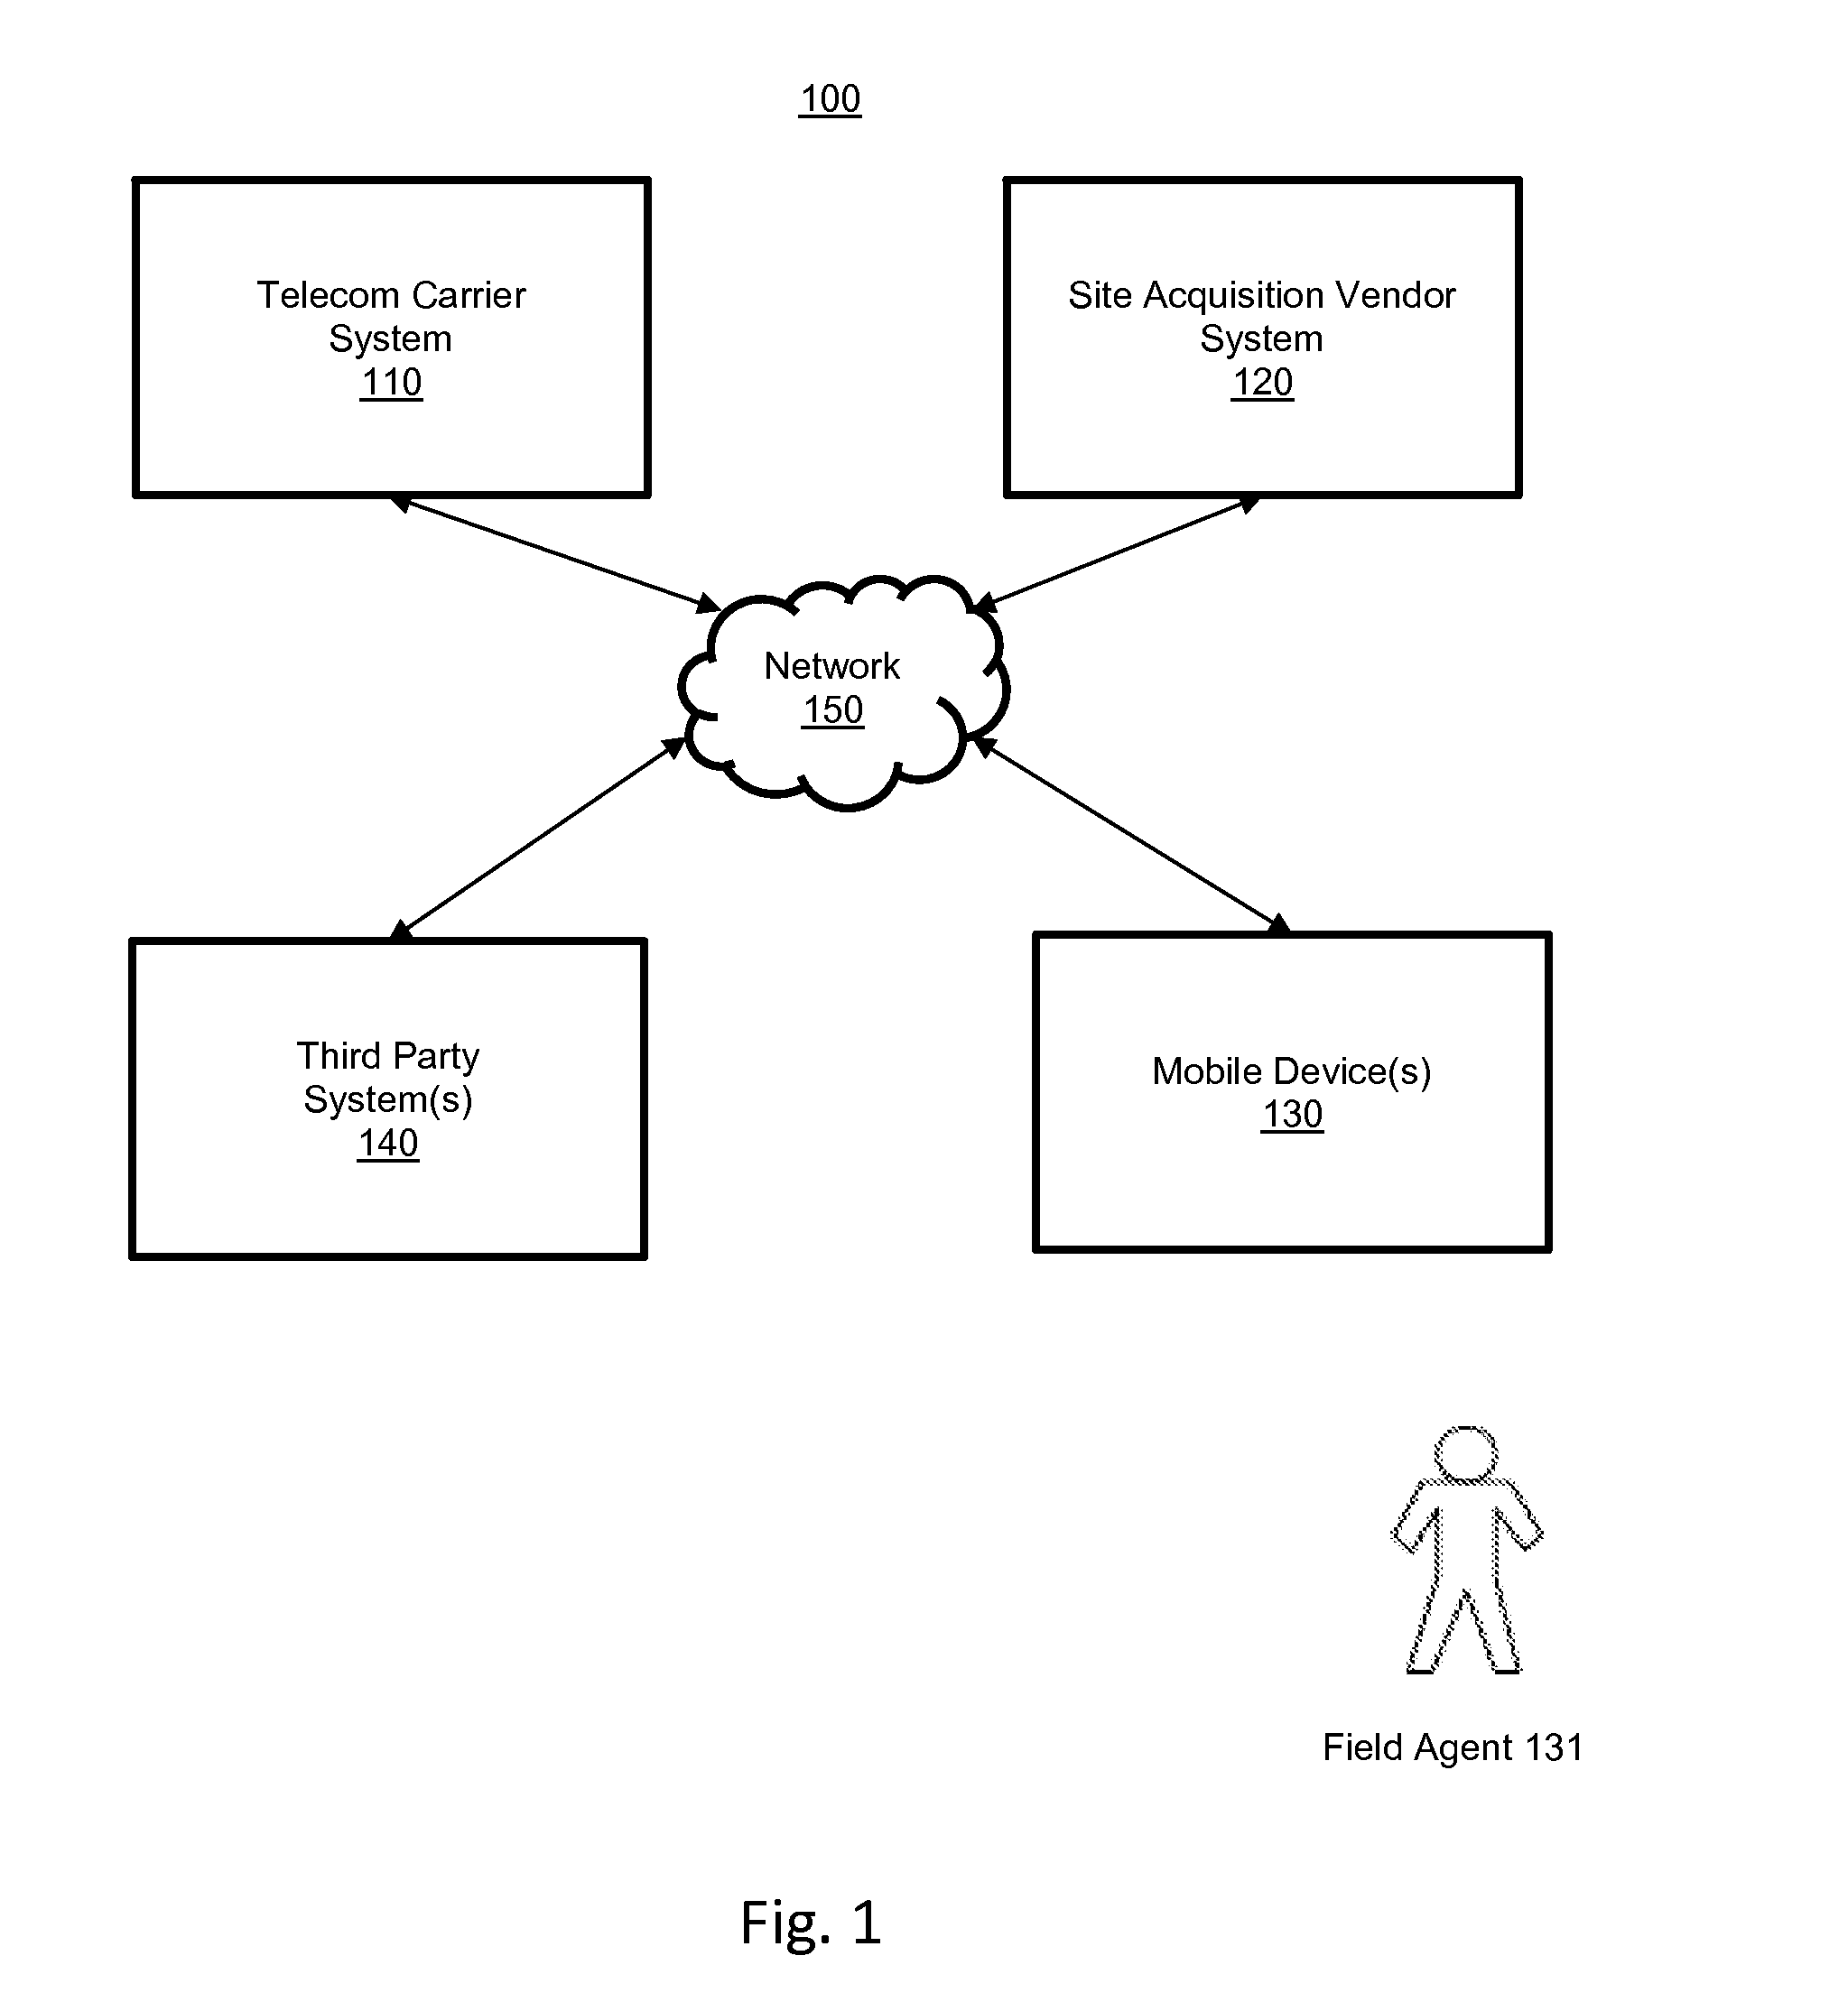 Systems and methods for providing site acquisition services